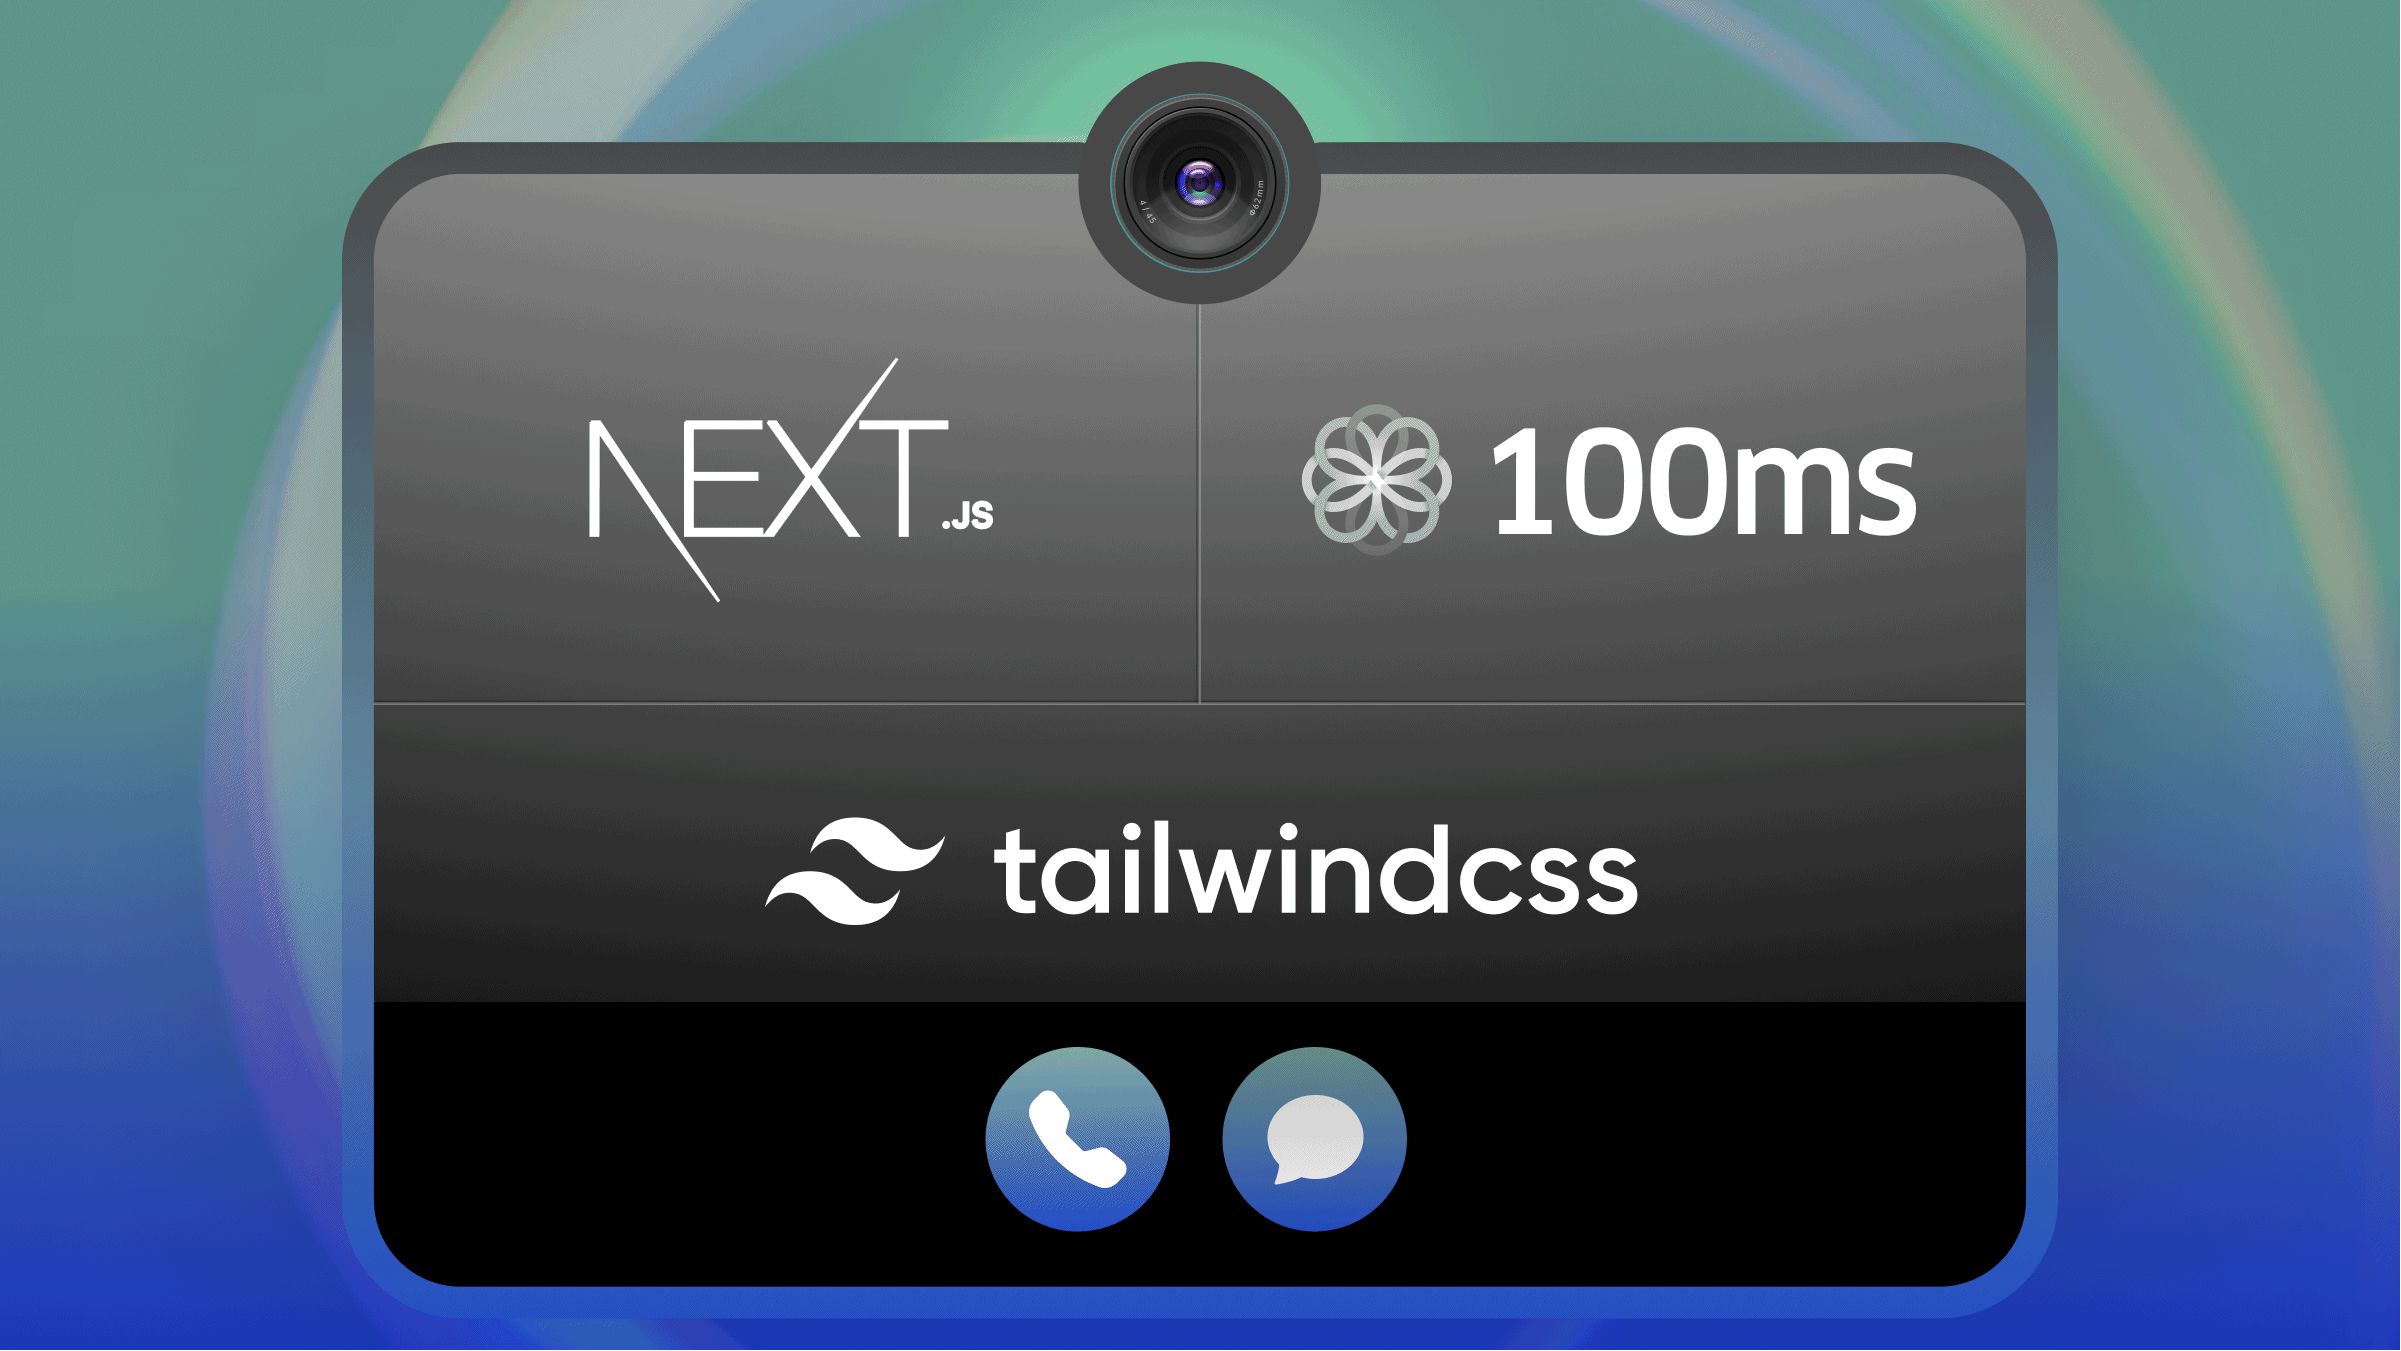 Building a Video Chat App with Next.js, 100ms, and TailwindCSS